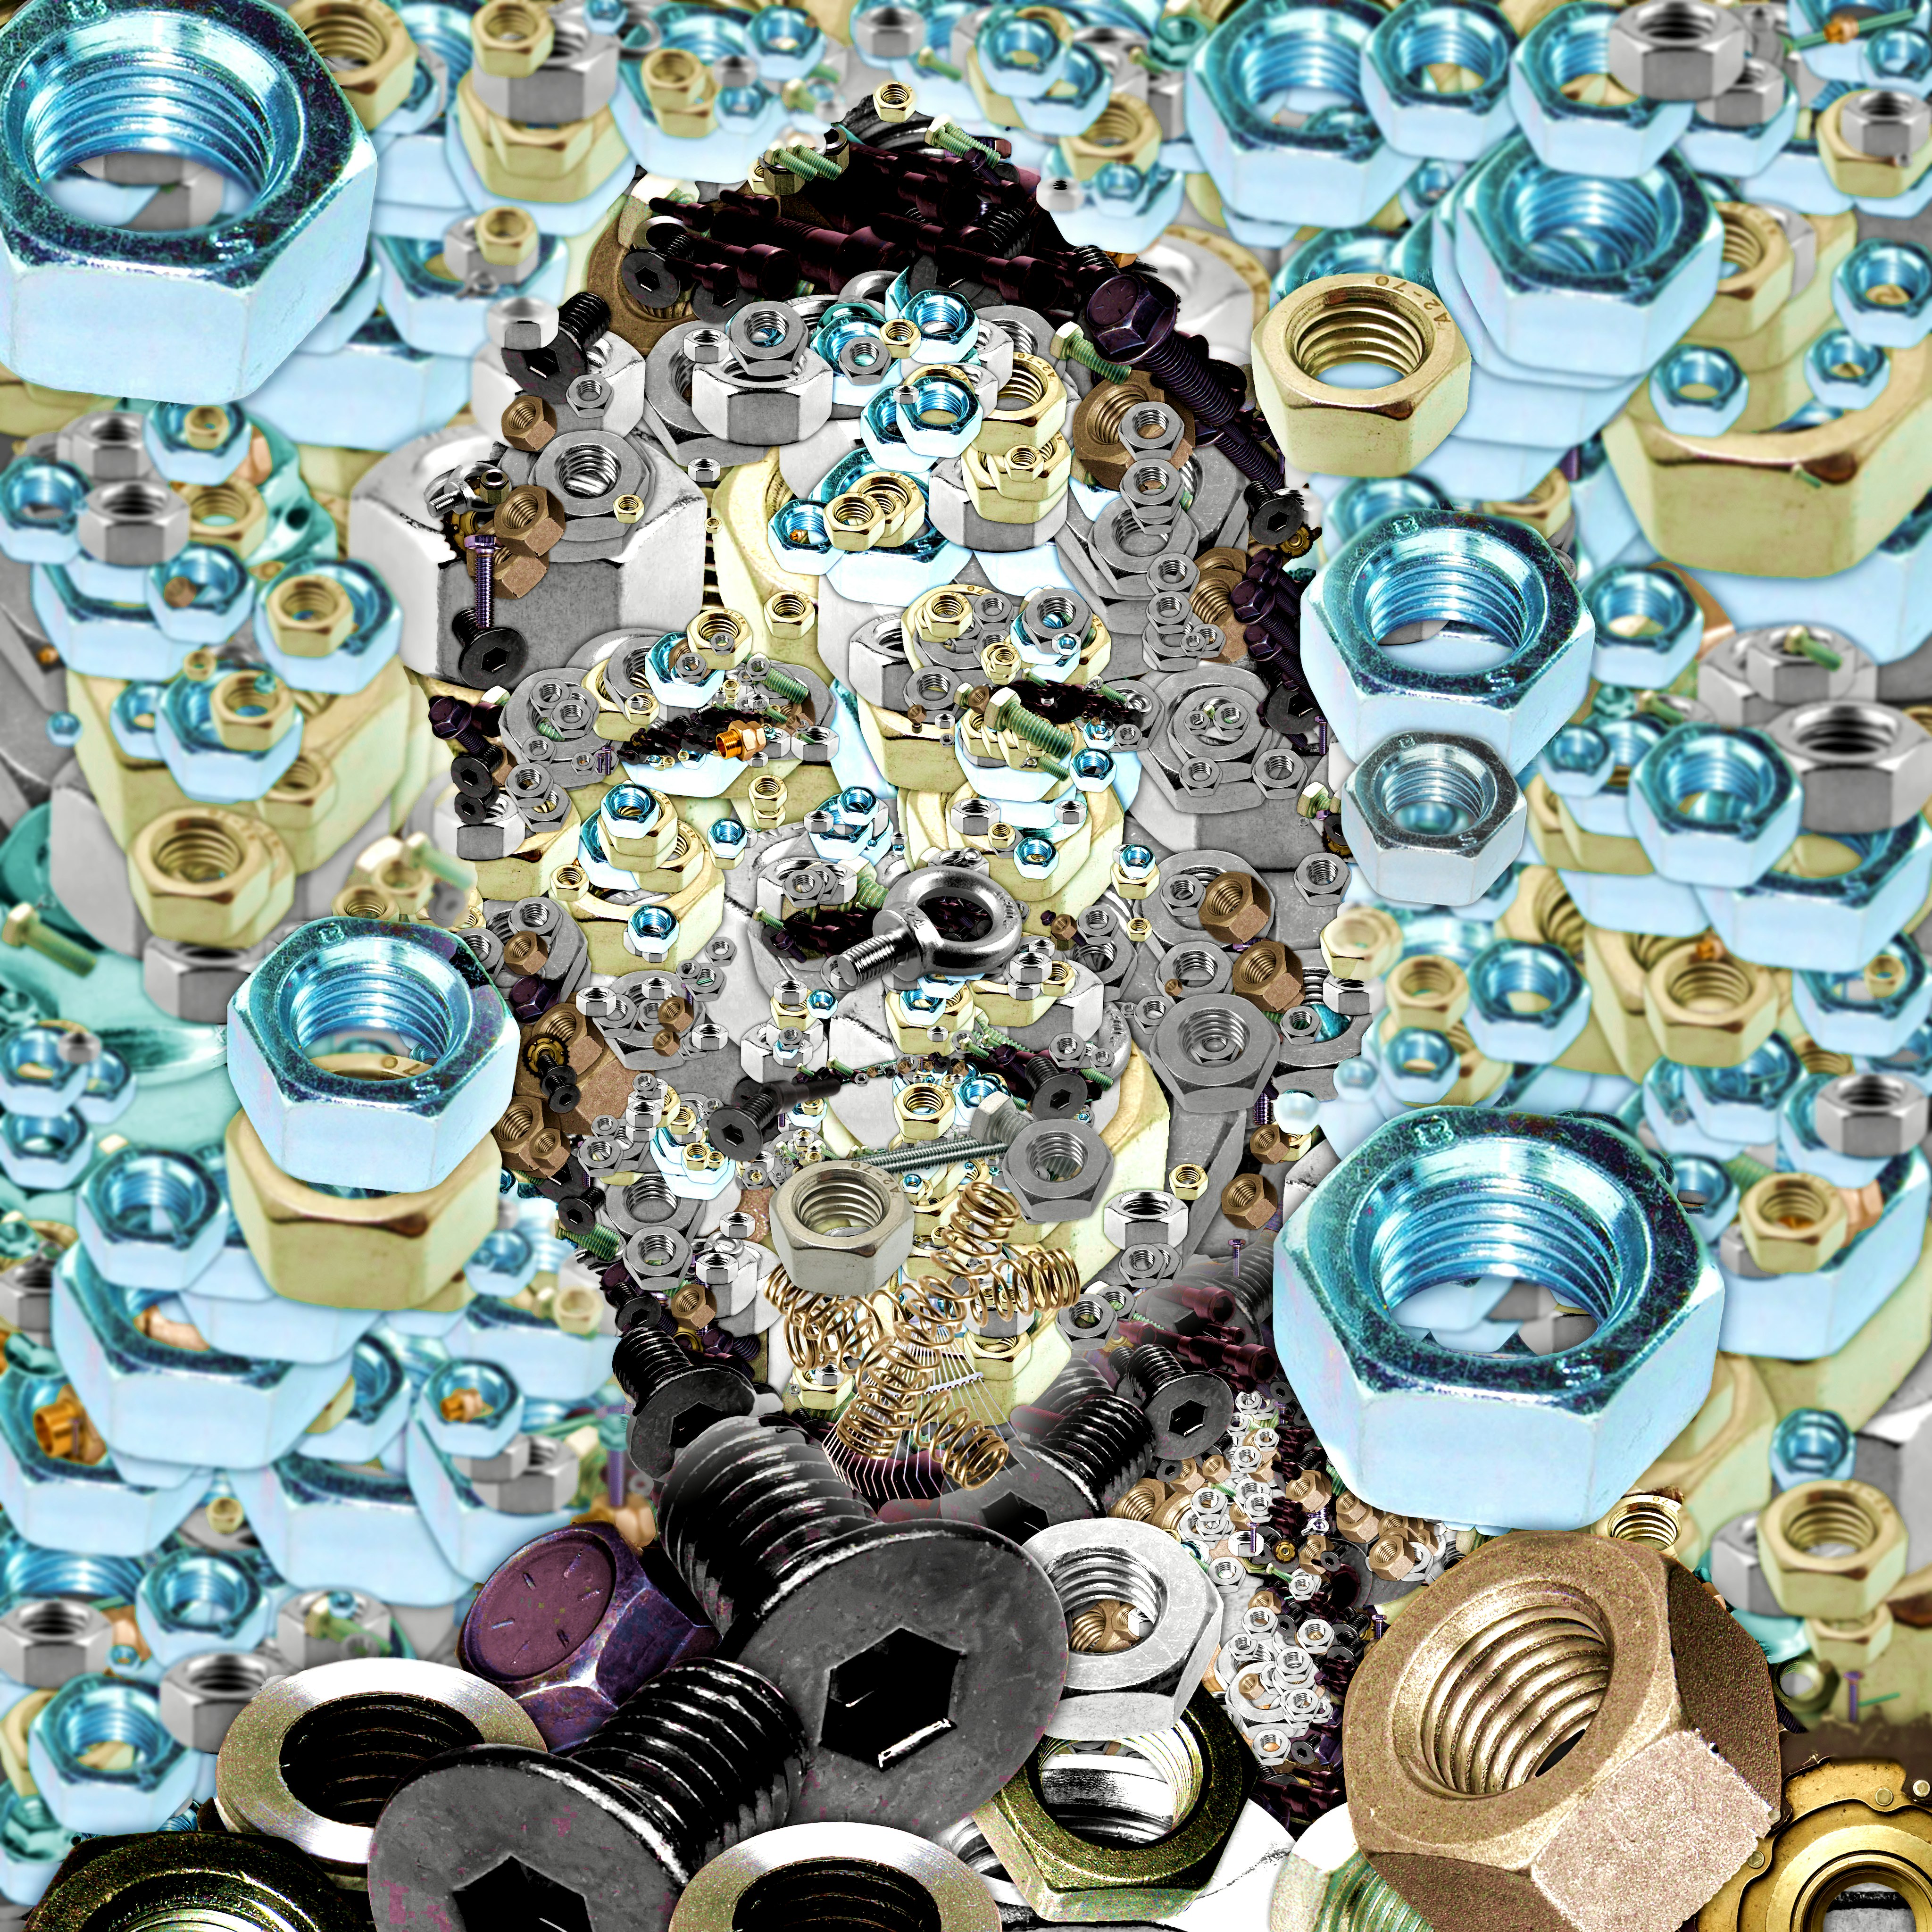 James Hetfield of Metallica made of bolts and nuts